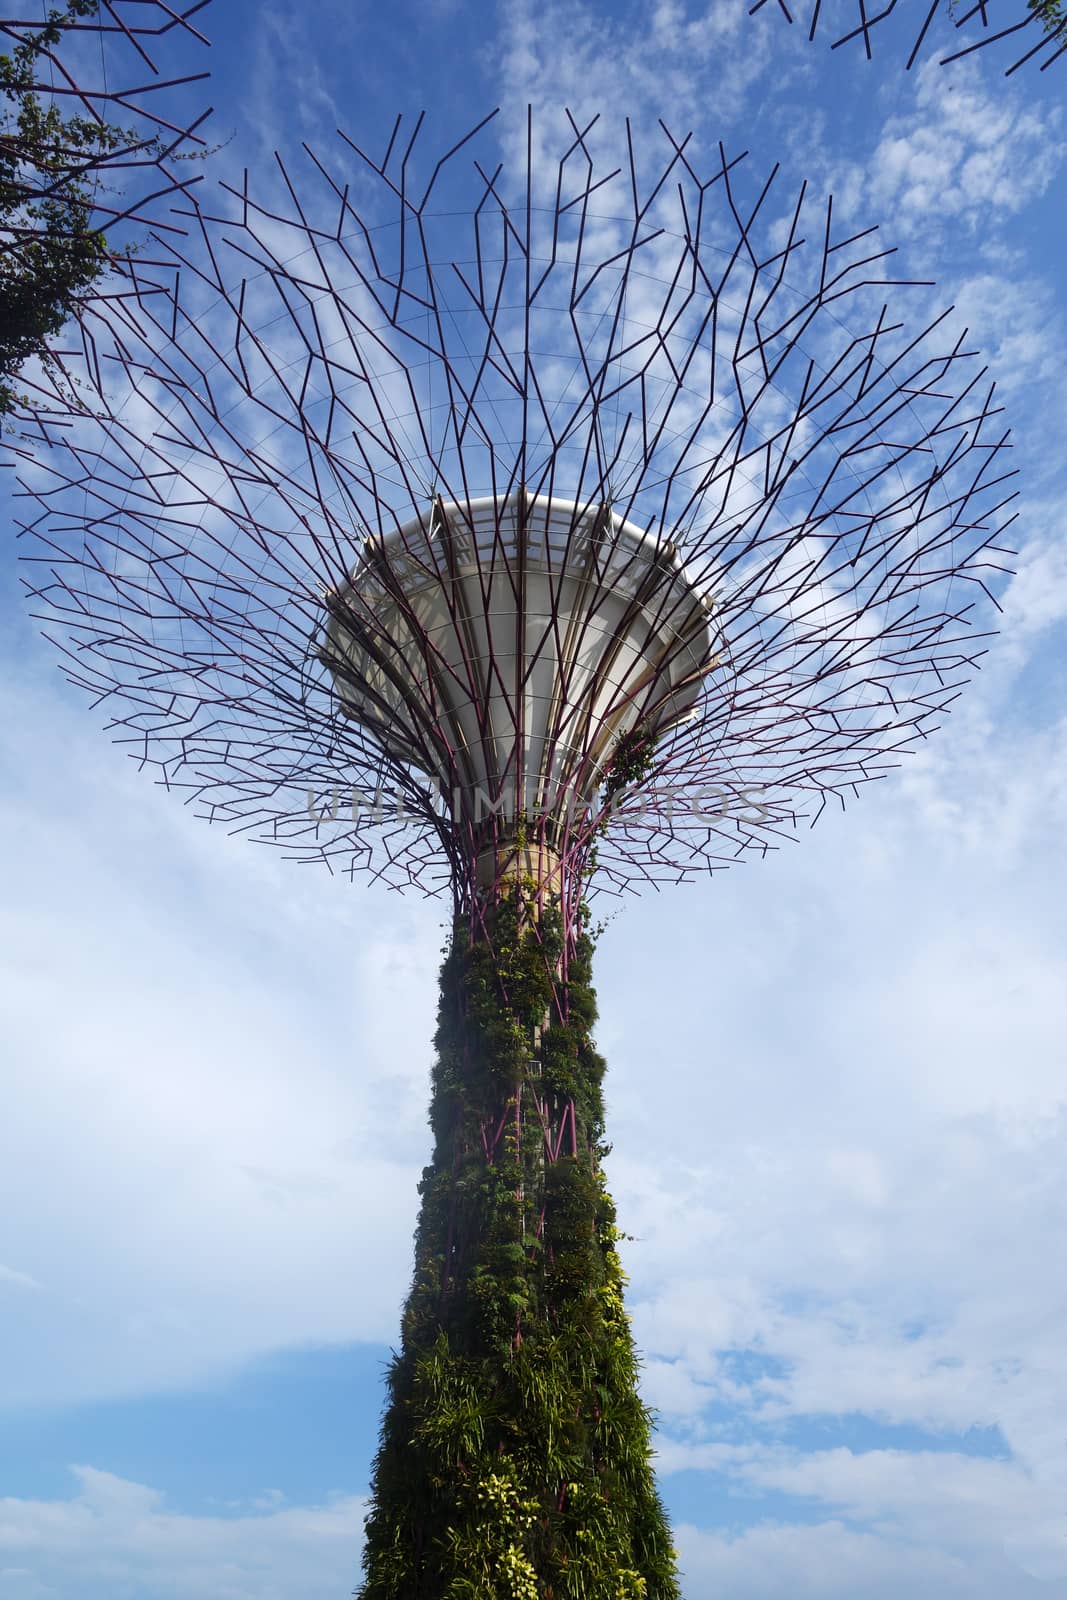 SINGAPORE - MAY 31: Gardens by the Bay on May 31, 2015 in Singapore. Gardens by the Bay was crowned World Building of the Year at the World Architecture Festival 2012